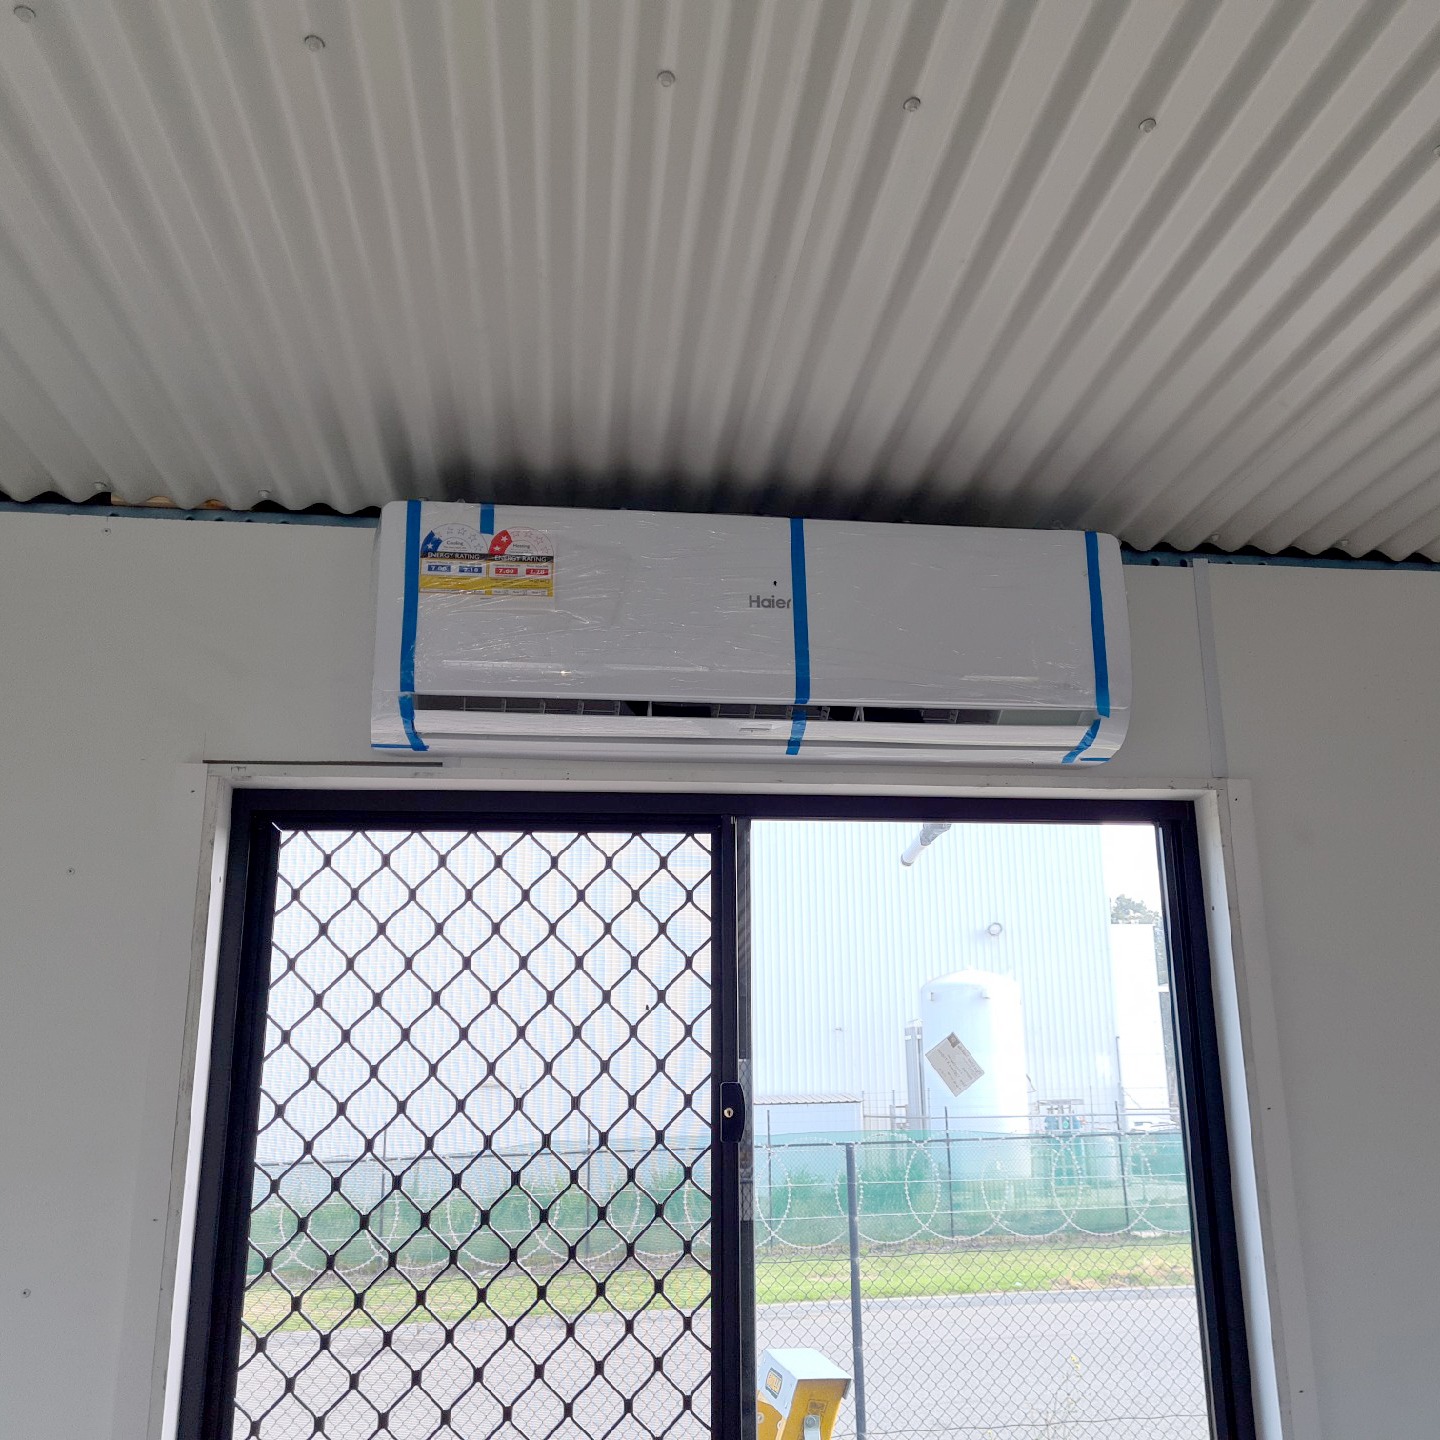 Supply and install high wall split systems to 4 portable buildings classrooms